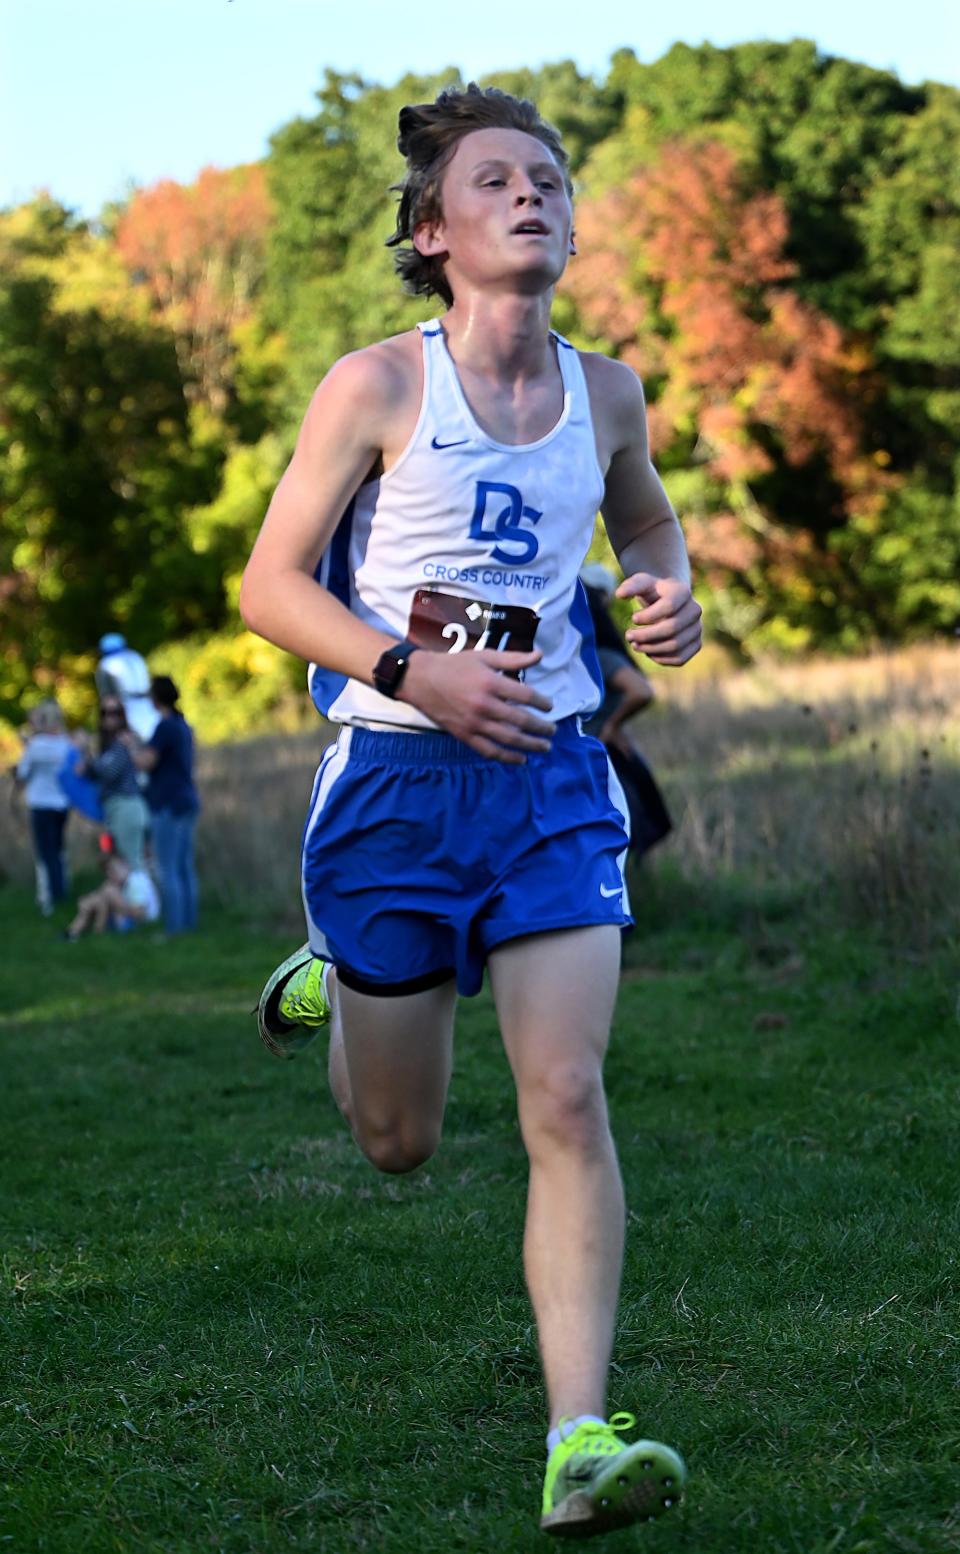 Dover-Sherborn's Aidan Pearsall was the top finisher in the boys race against Norton at the final home cross-country meet of the season at Dover-Sherborn Regional High School in Dover, Oct. 6, 2022.